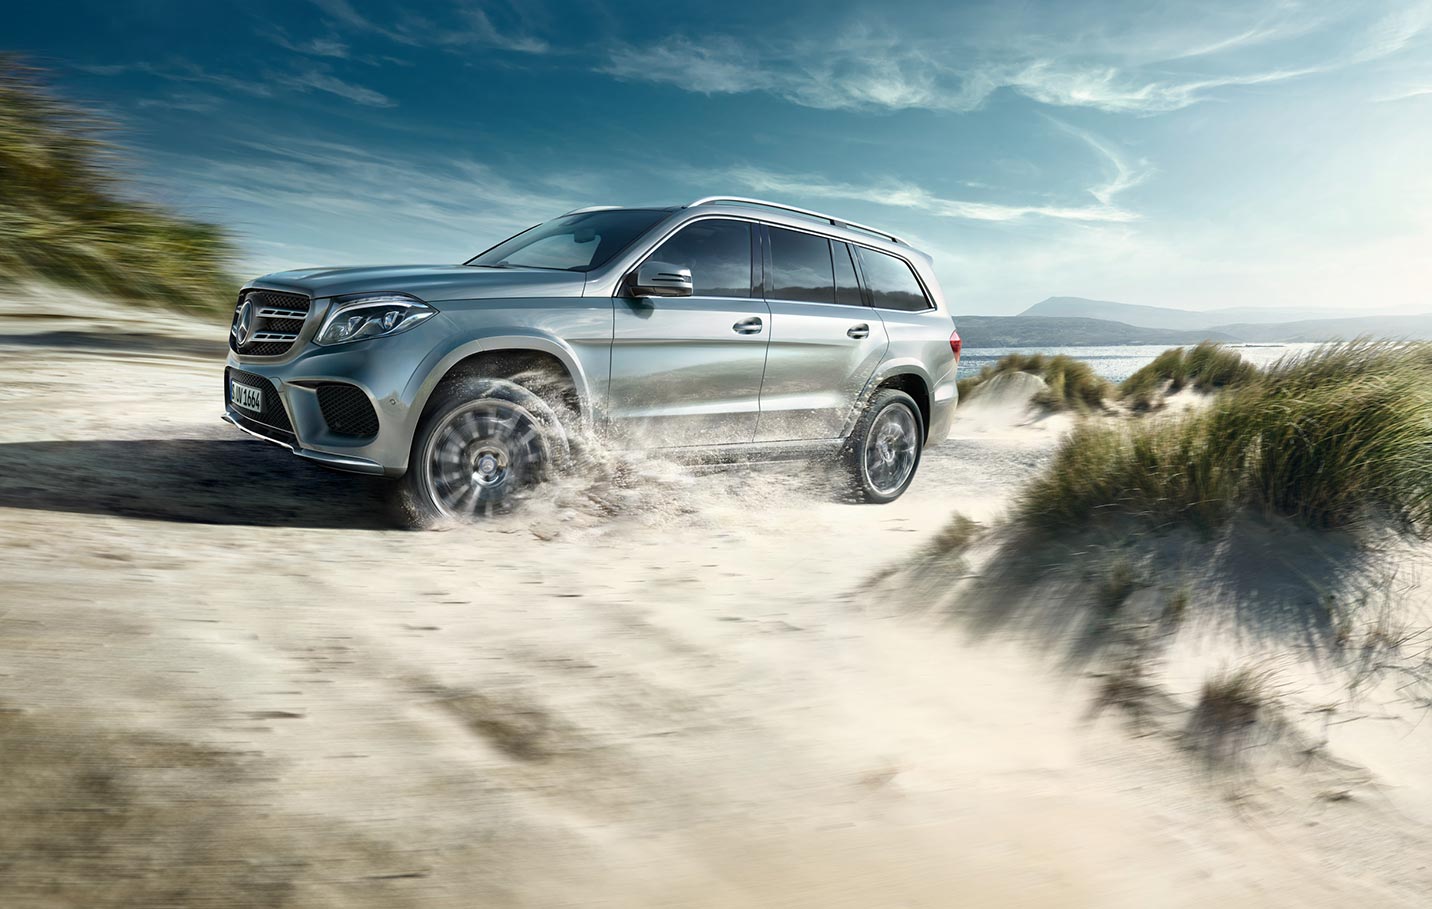 Performance Attributes of the 2018 Mercedes-AMG GLS 63 